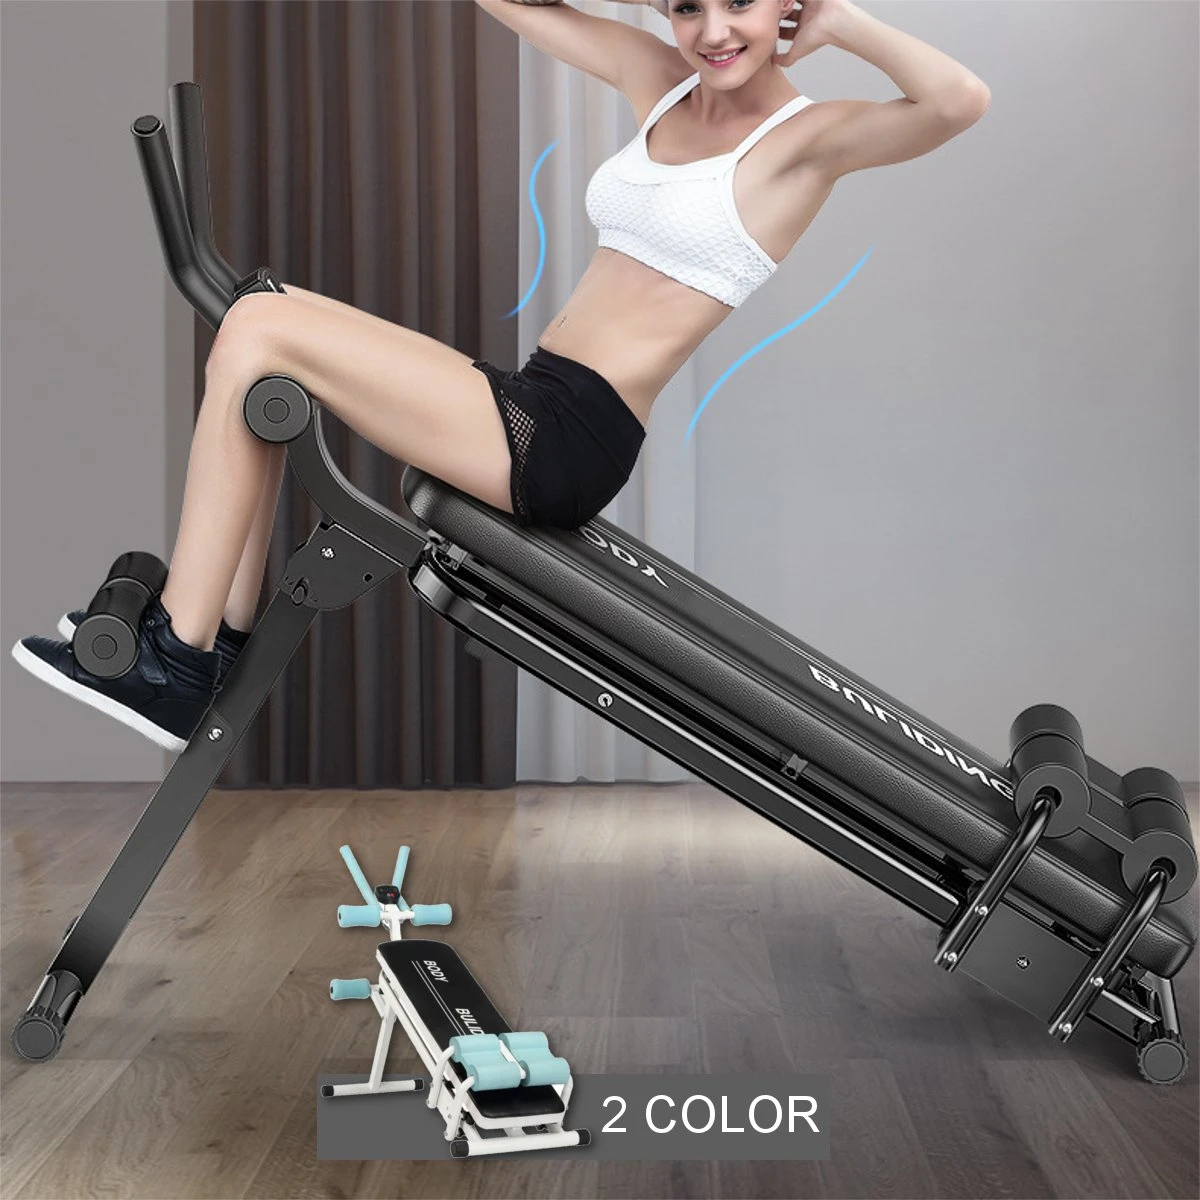 Folding 2 In 1 Fitness Tool Adjustable Abdominal Trainer Home Gym  Integrated Fitness Equipments Body Building Lose Weight|Push-Ups Stands| -  AliExpress